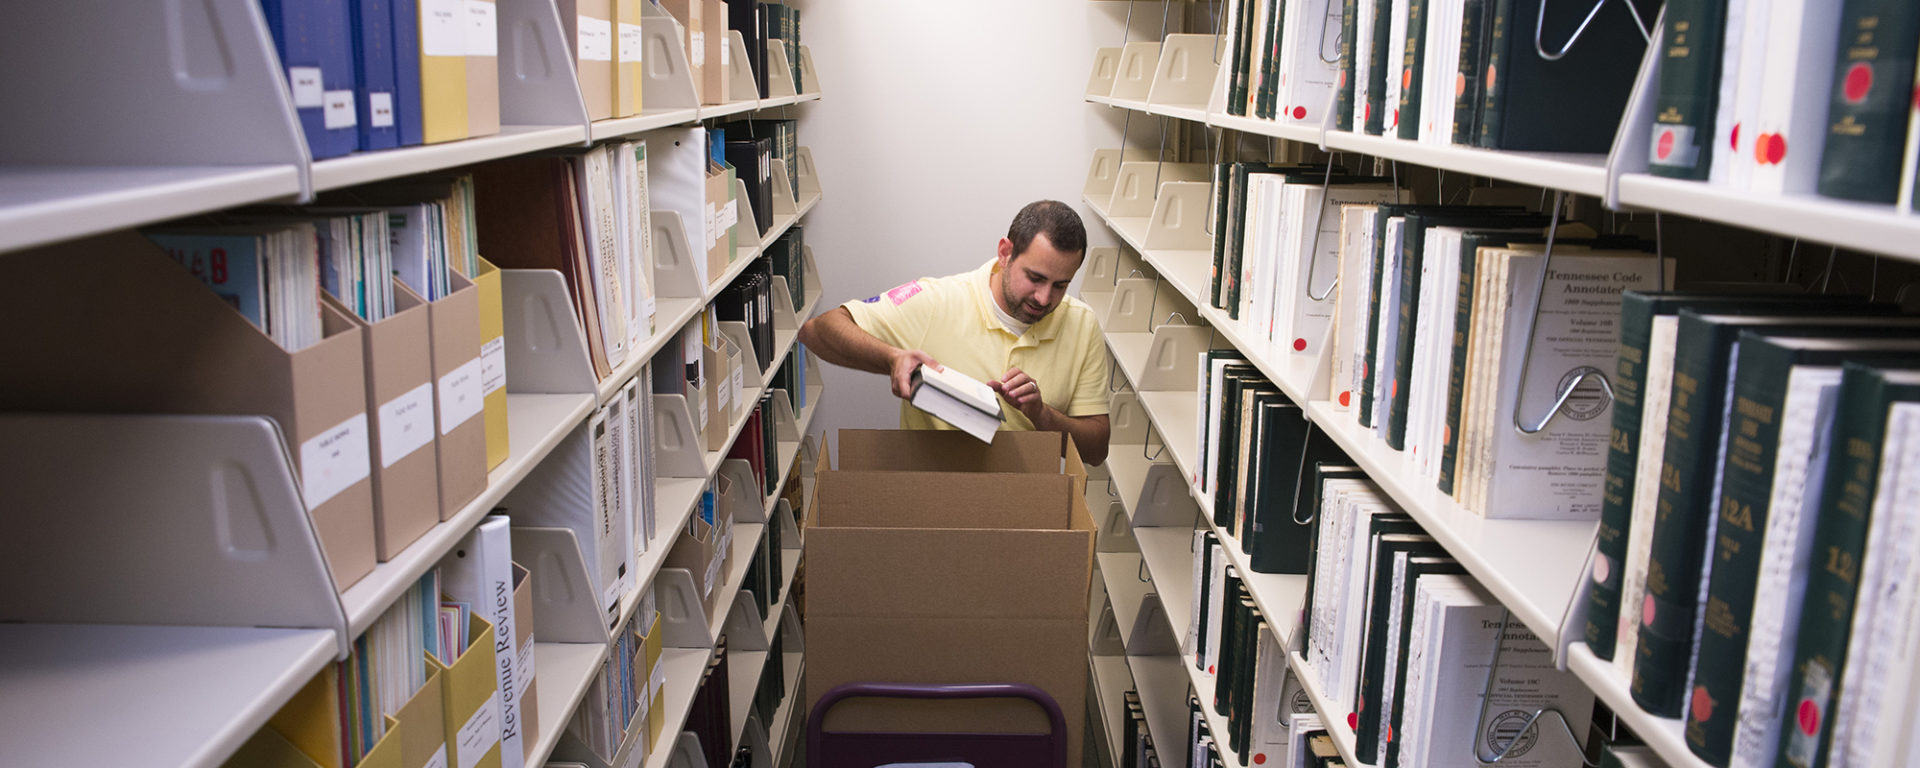 MTAS agent packing up files for office move